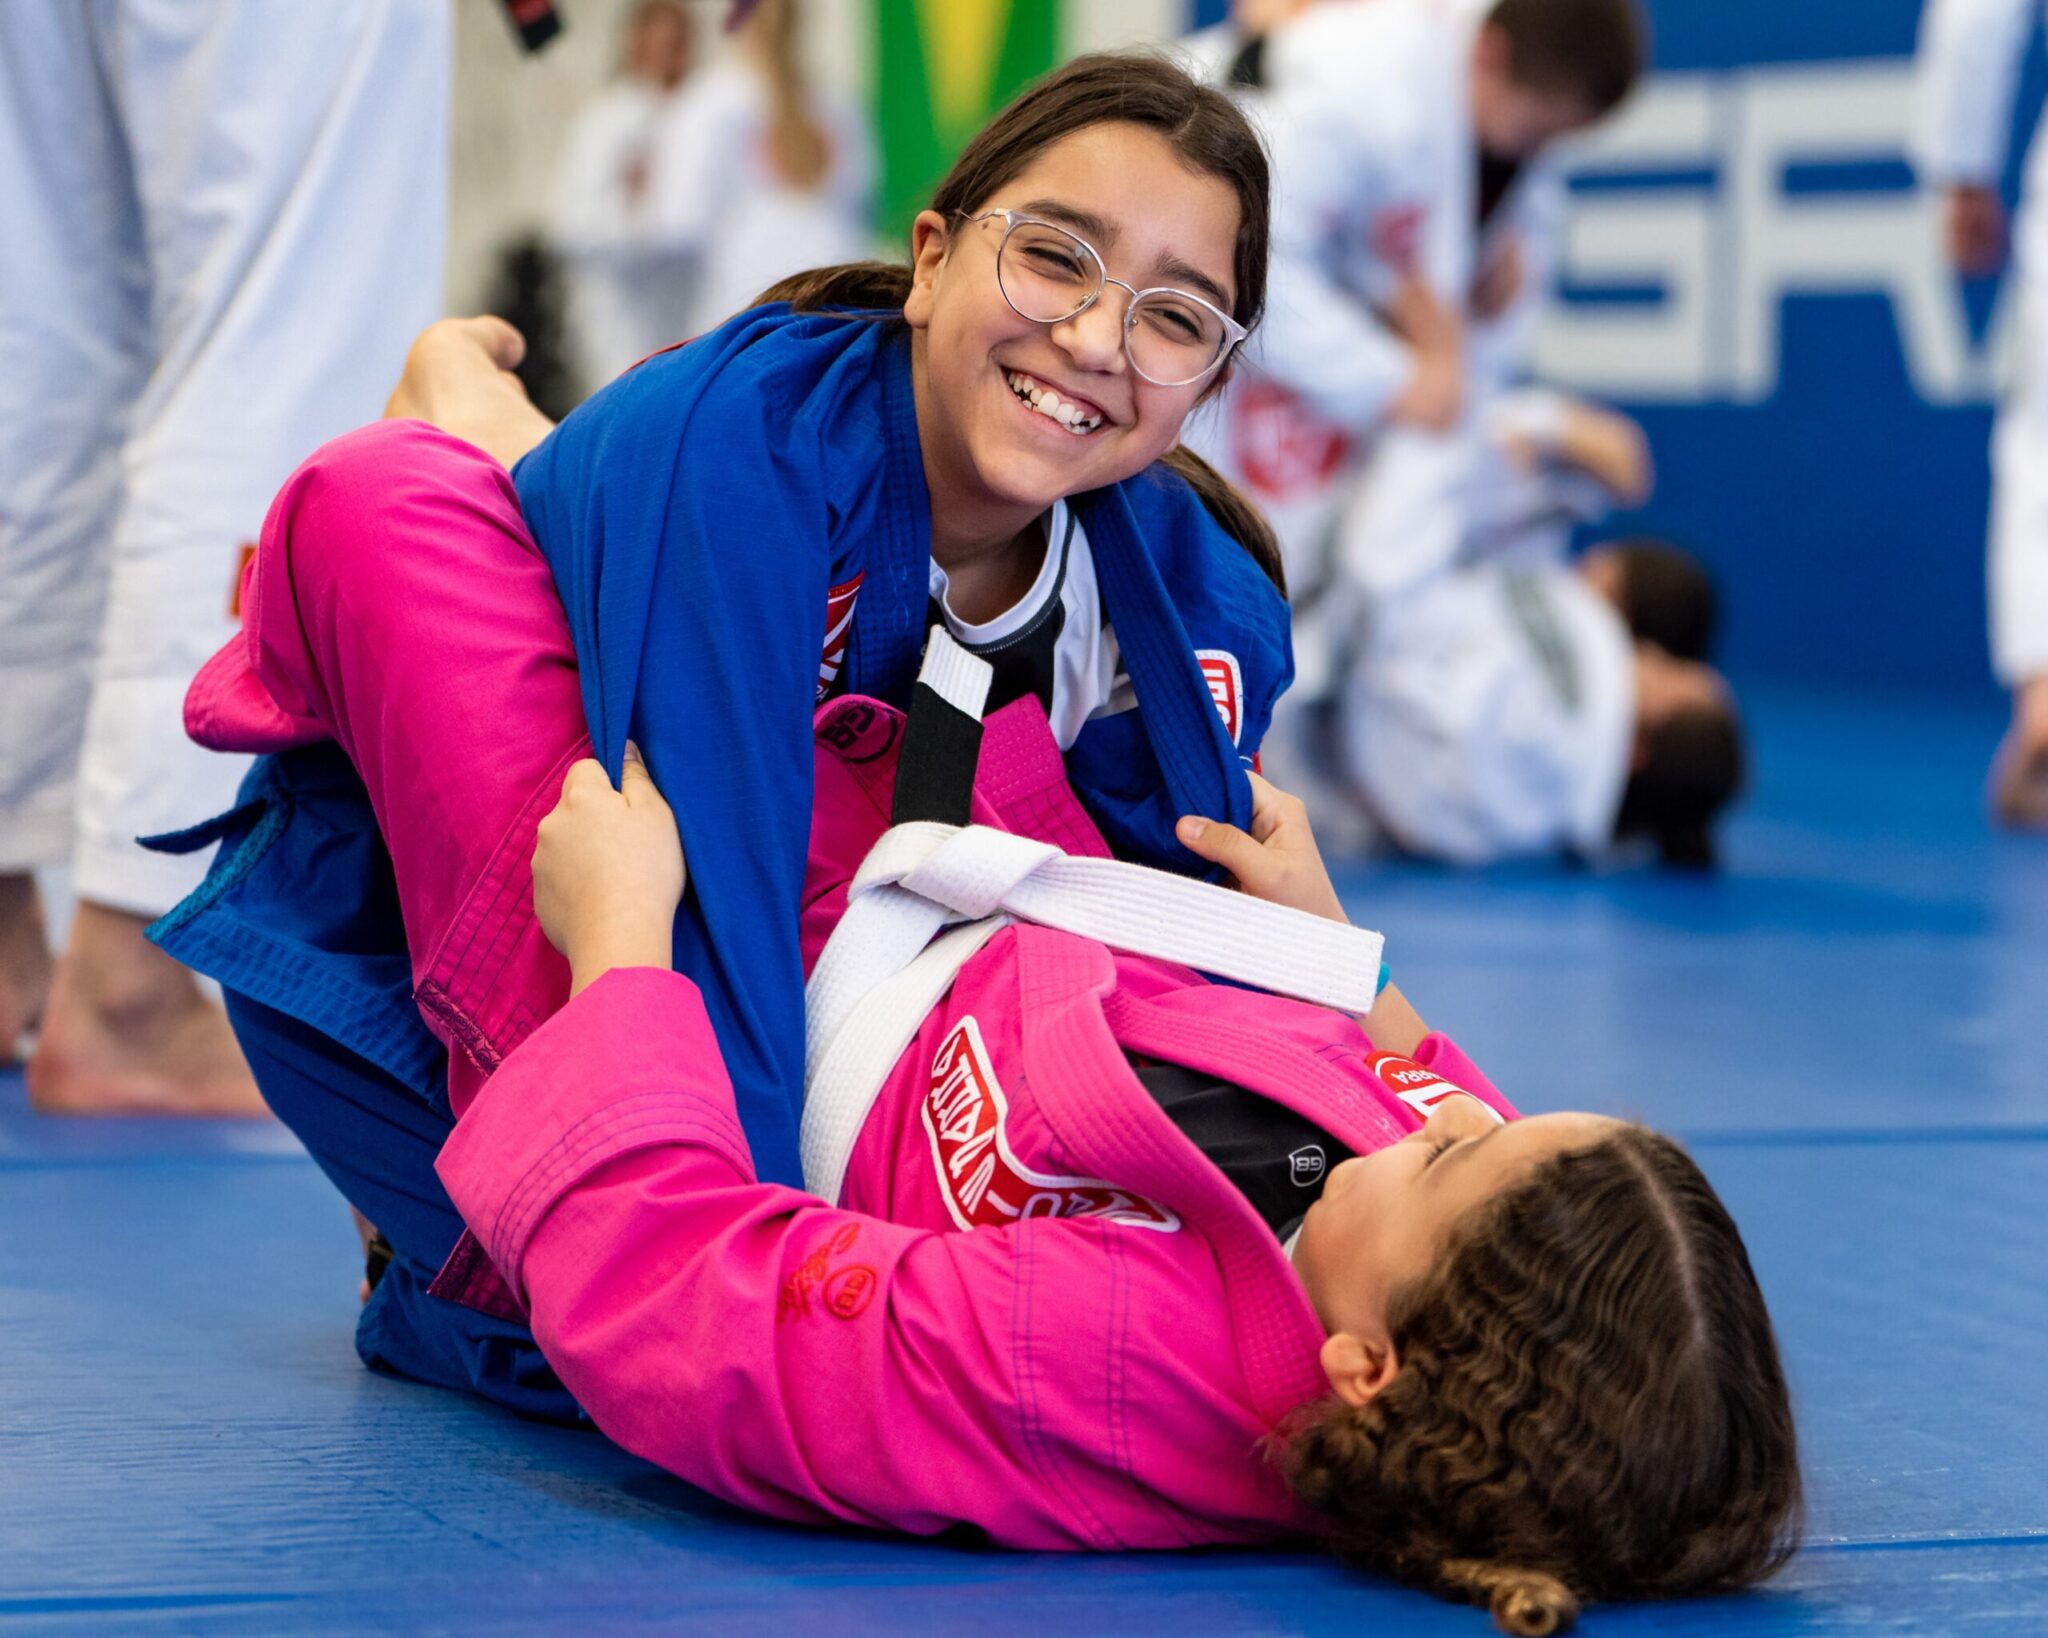 Two girls practicing BJJ, one is wearing prescription glasses and is smiling at the camera, while the other is on the floor.